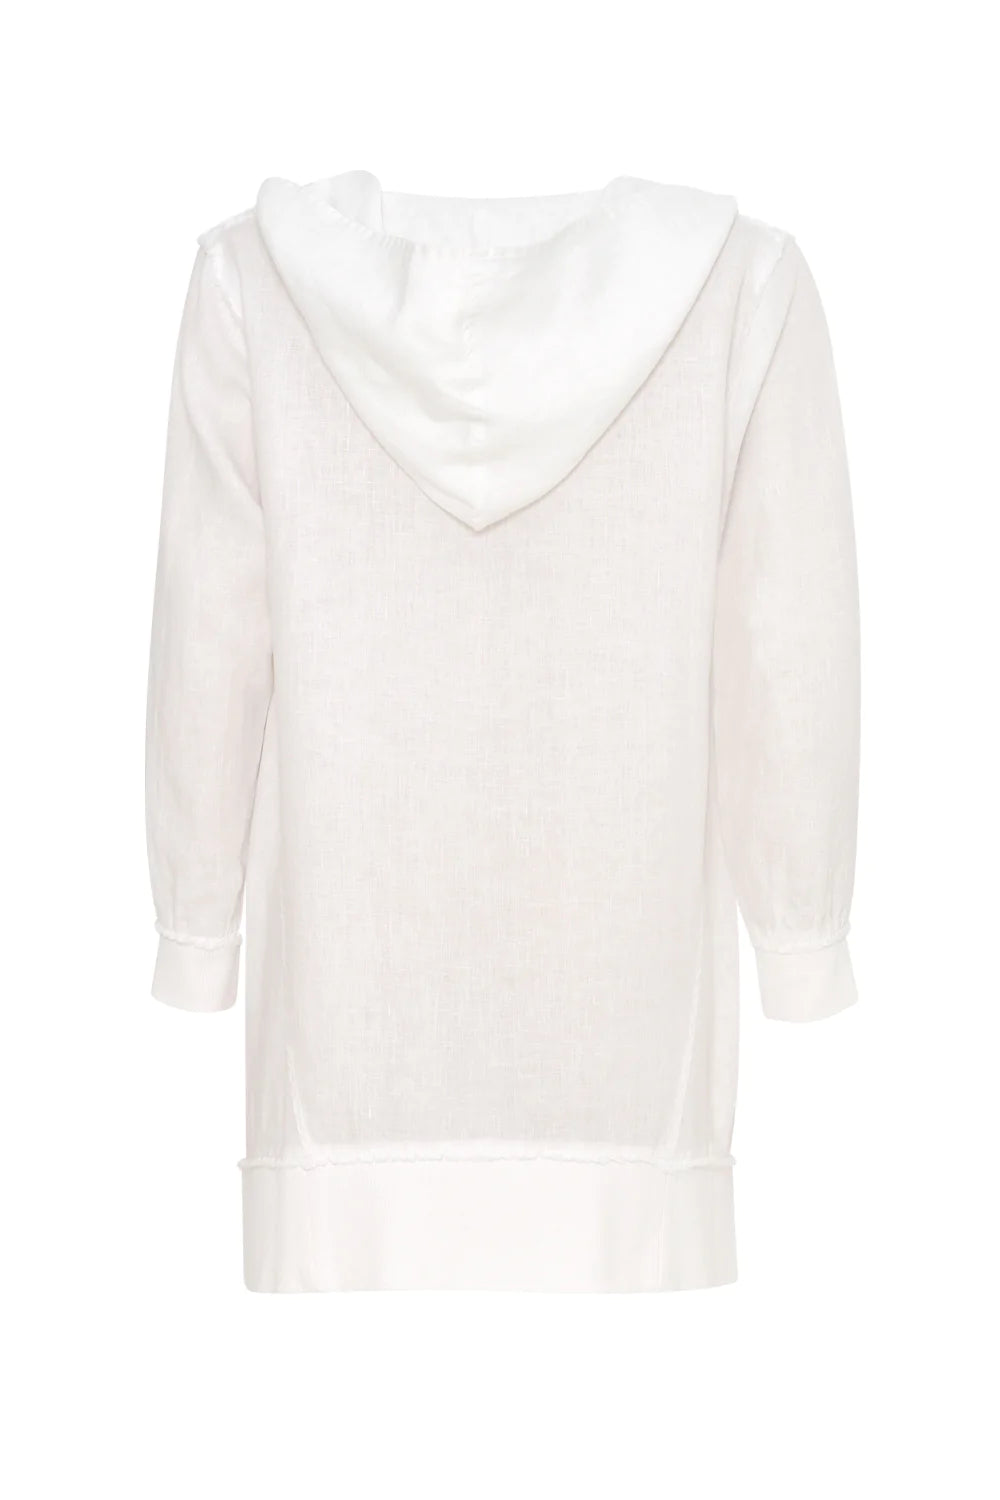 Madly Sweetly Linen The Life Duster (10) RRP:$279